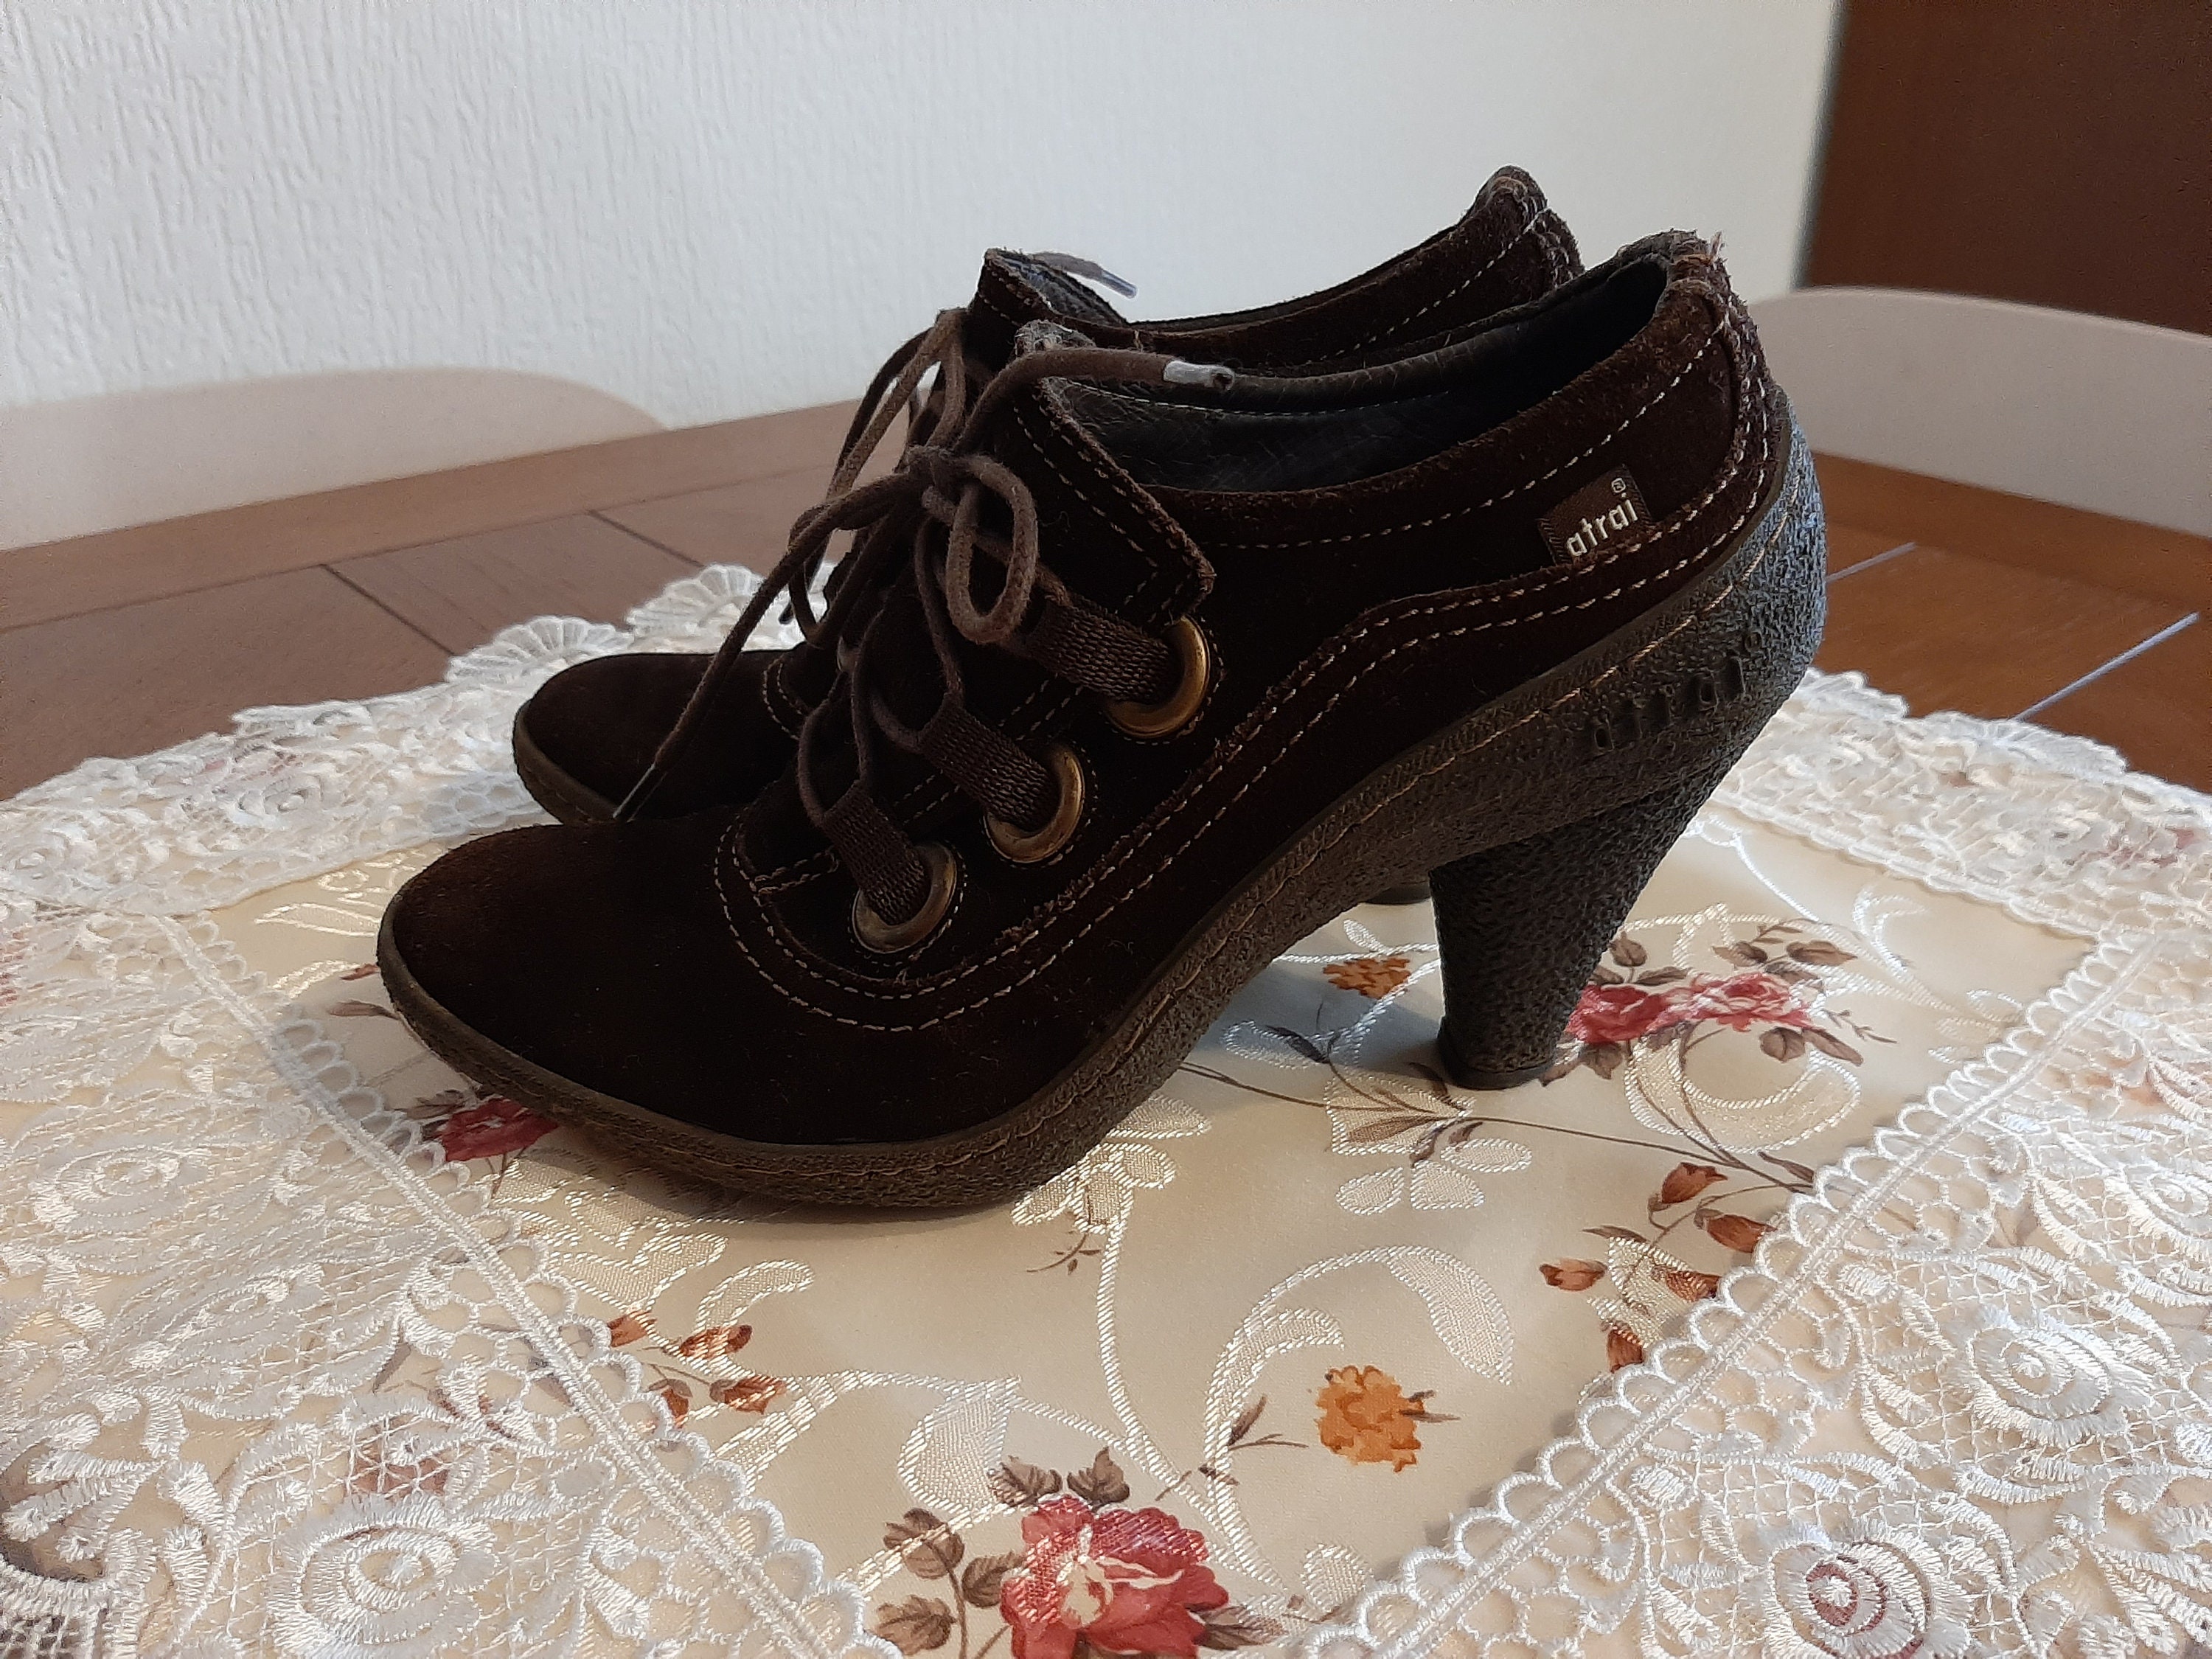 Chaussures portugaises en ligne femme - Chaussure femme made in Portugal -  Page 2